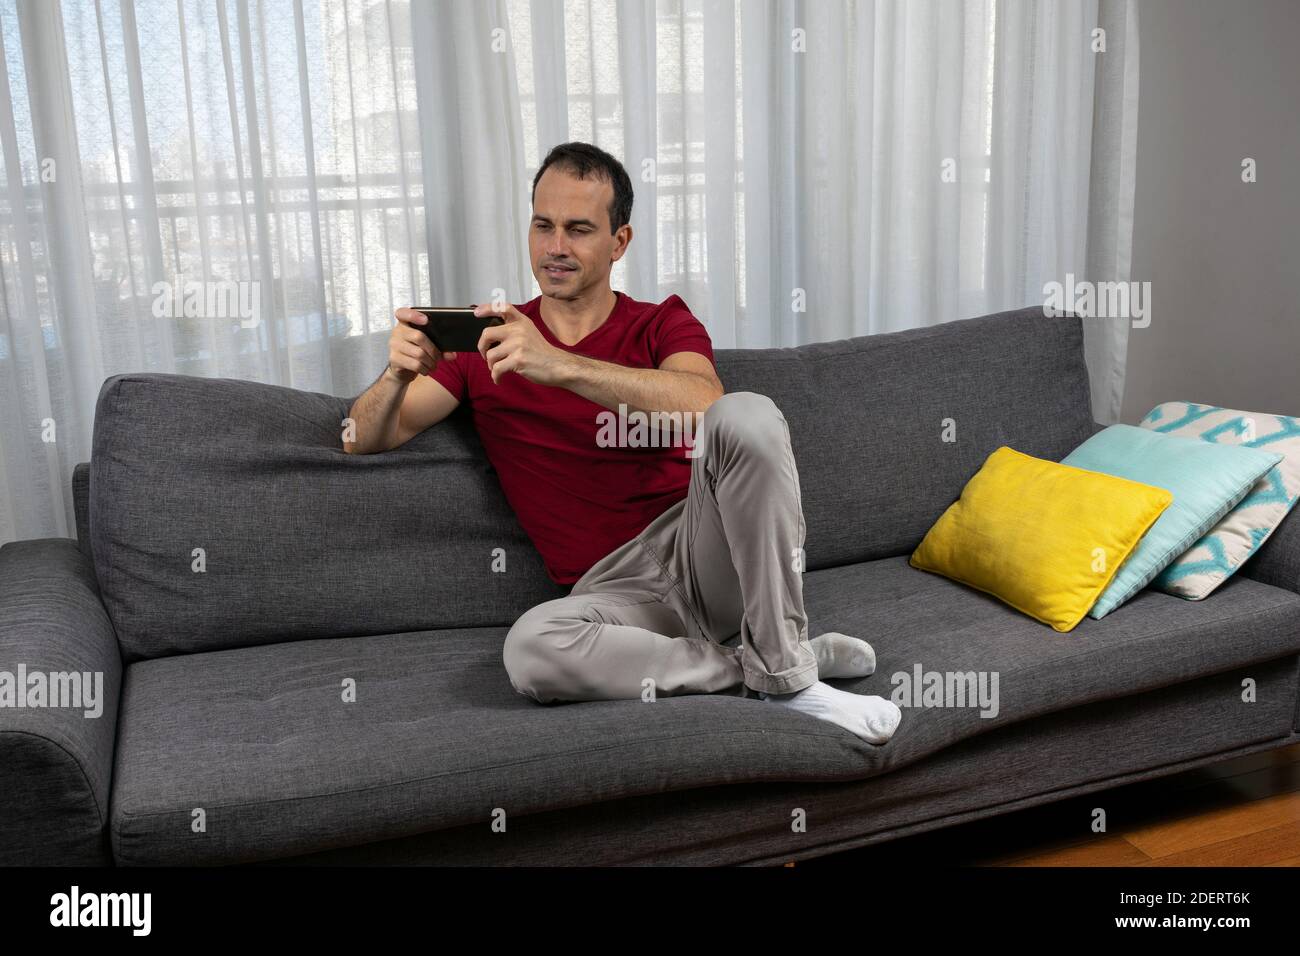 Mature man (44 years old) sitting on the couch and watching movie on his smartphone. Stock Photo